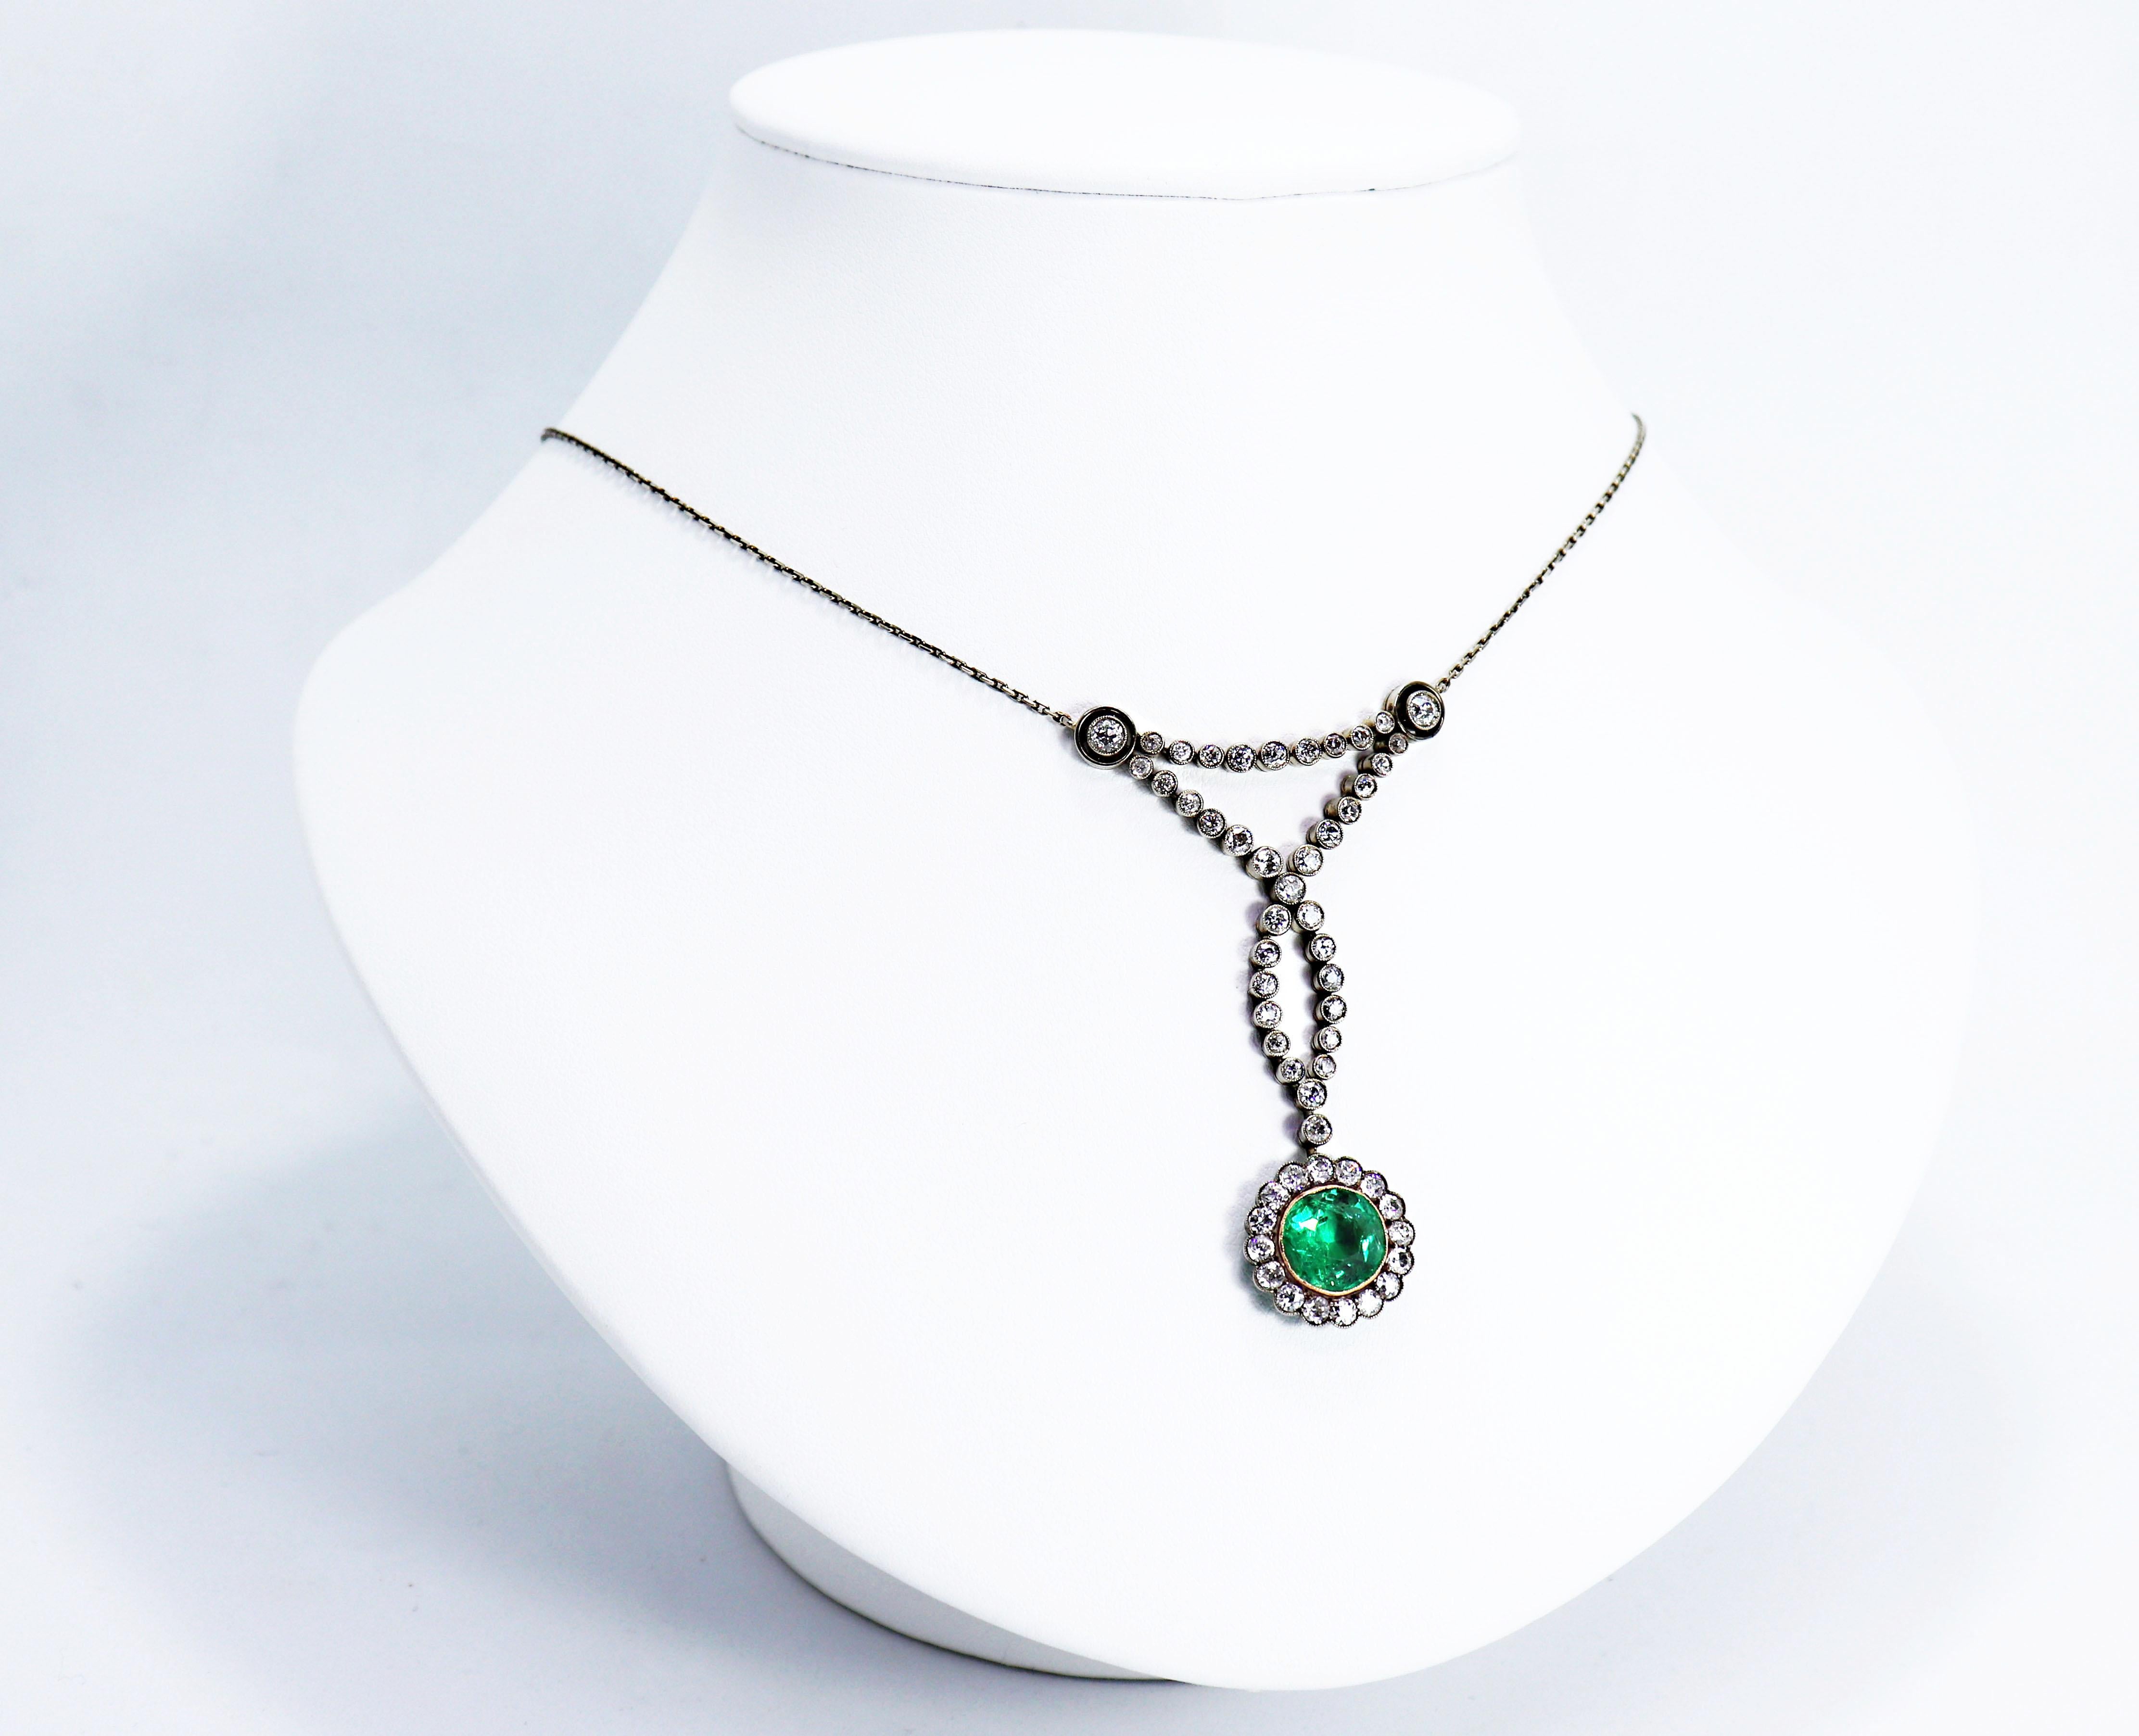 Magnificent antique necklace set with a round shaped emerald weighing approximately 3.00+ carats accompanied by 54 old mine cut diamonds in rub over, open back settings weighing a total approximate weight of 3.10 carats in a beautifully elegant